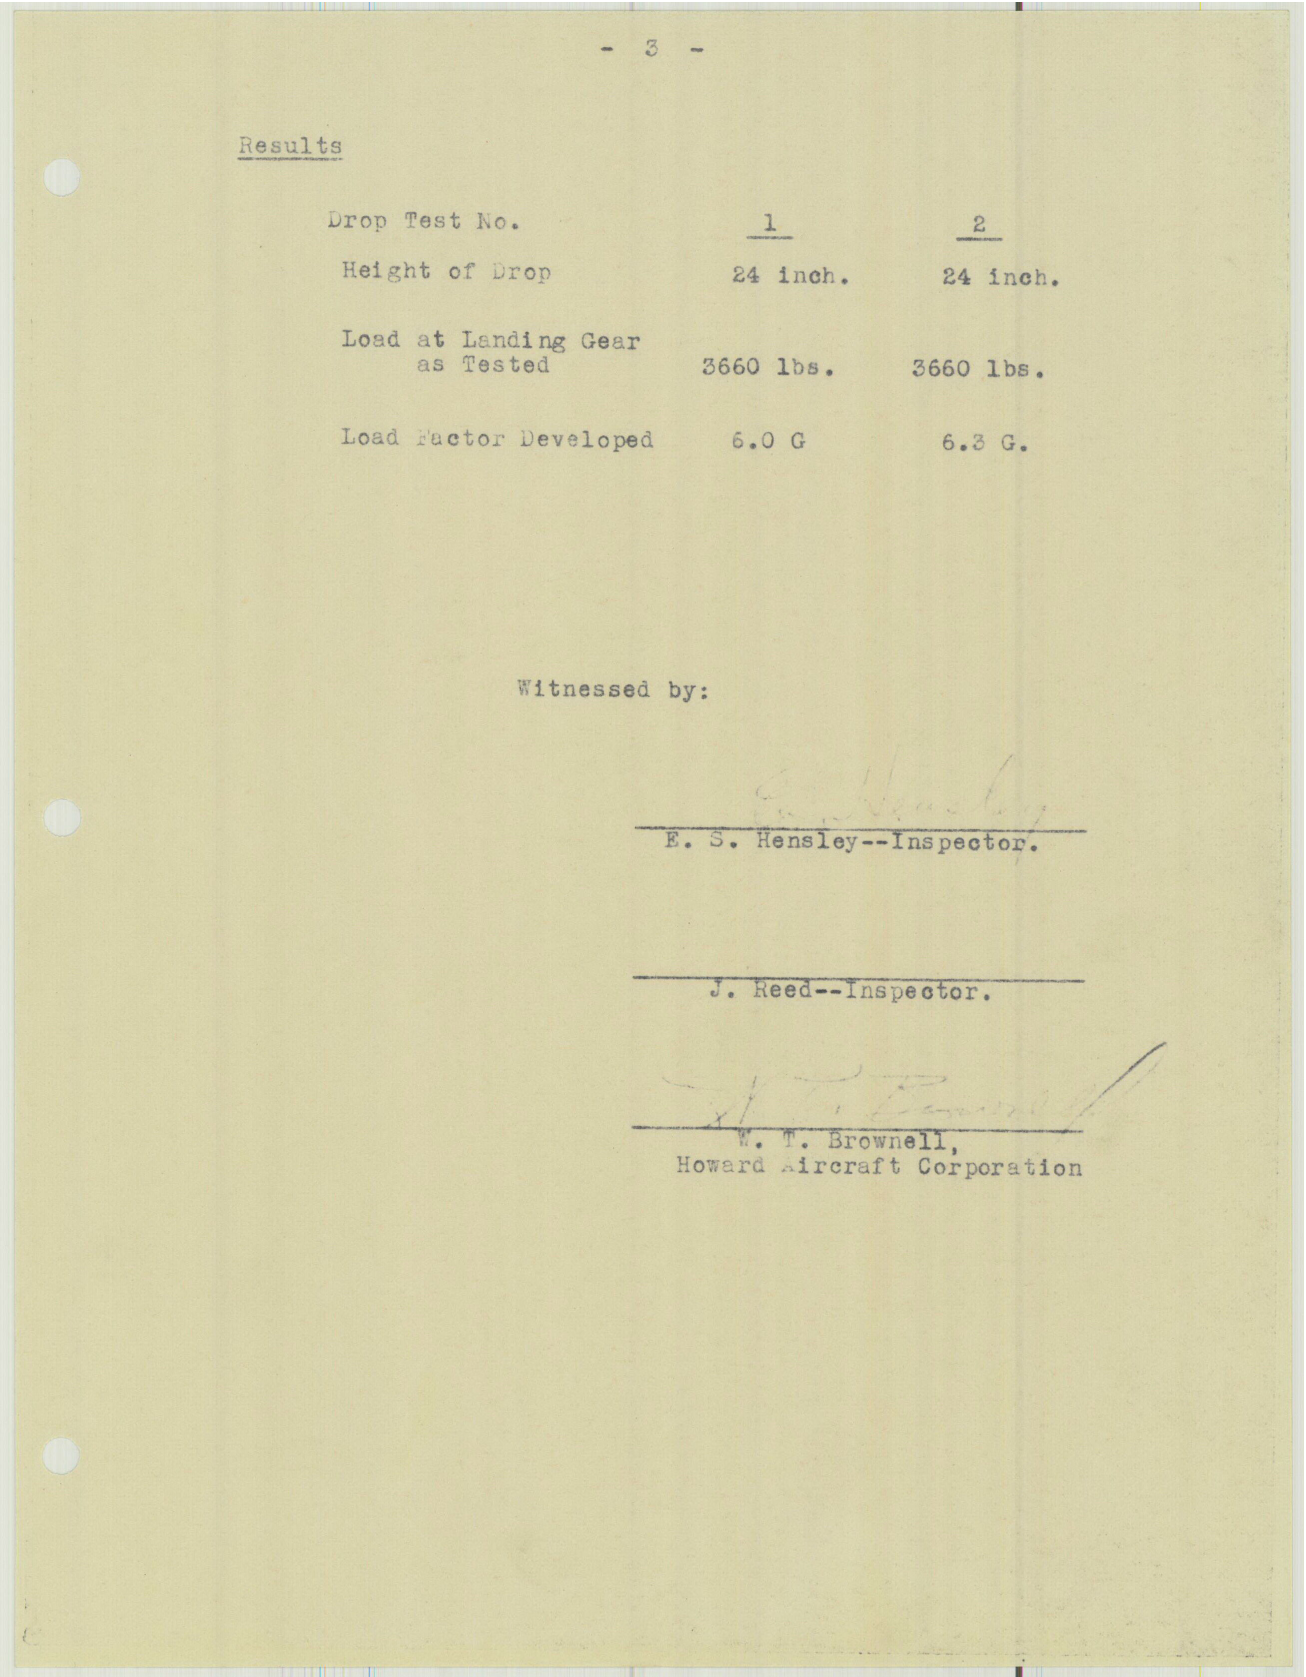 Sample page 5 from AirCorps Library document: Report 152, Landing Gear Drop Test, DGA-15